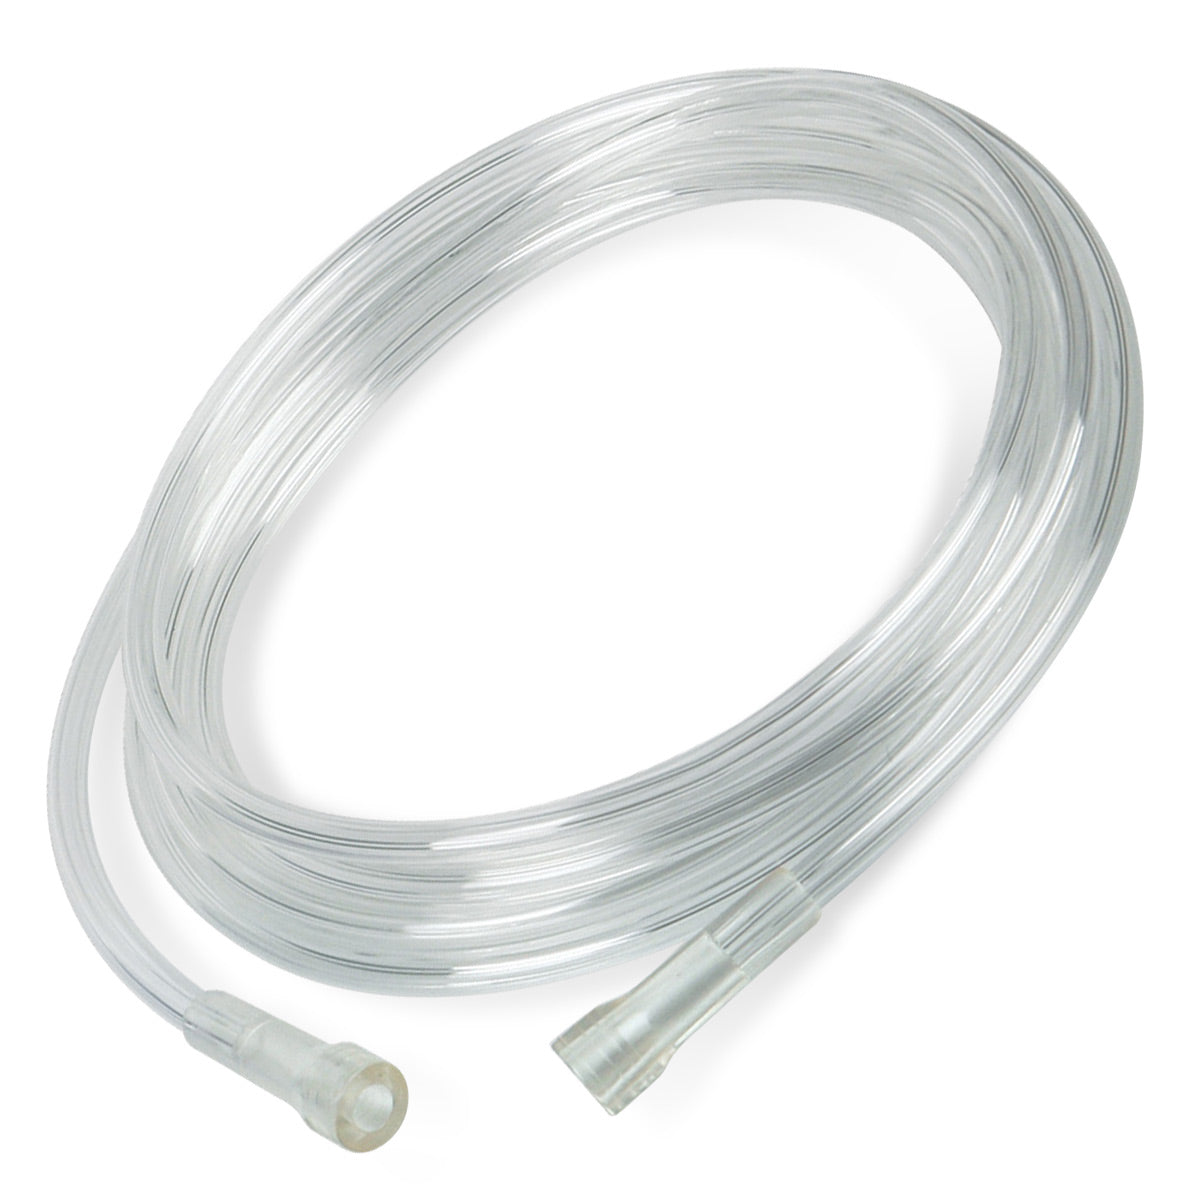 Clear Crush Resistant Multi-Channel Lumen 14 Foot Oxygen Supply Tubing